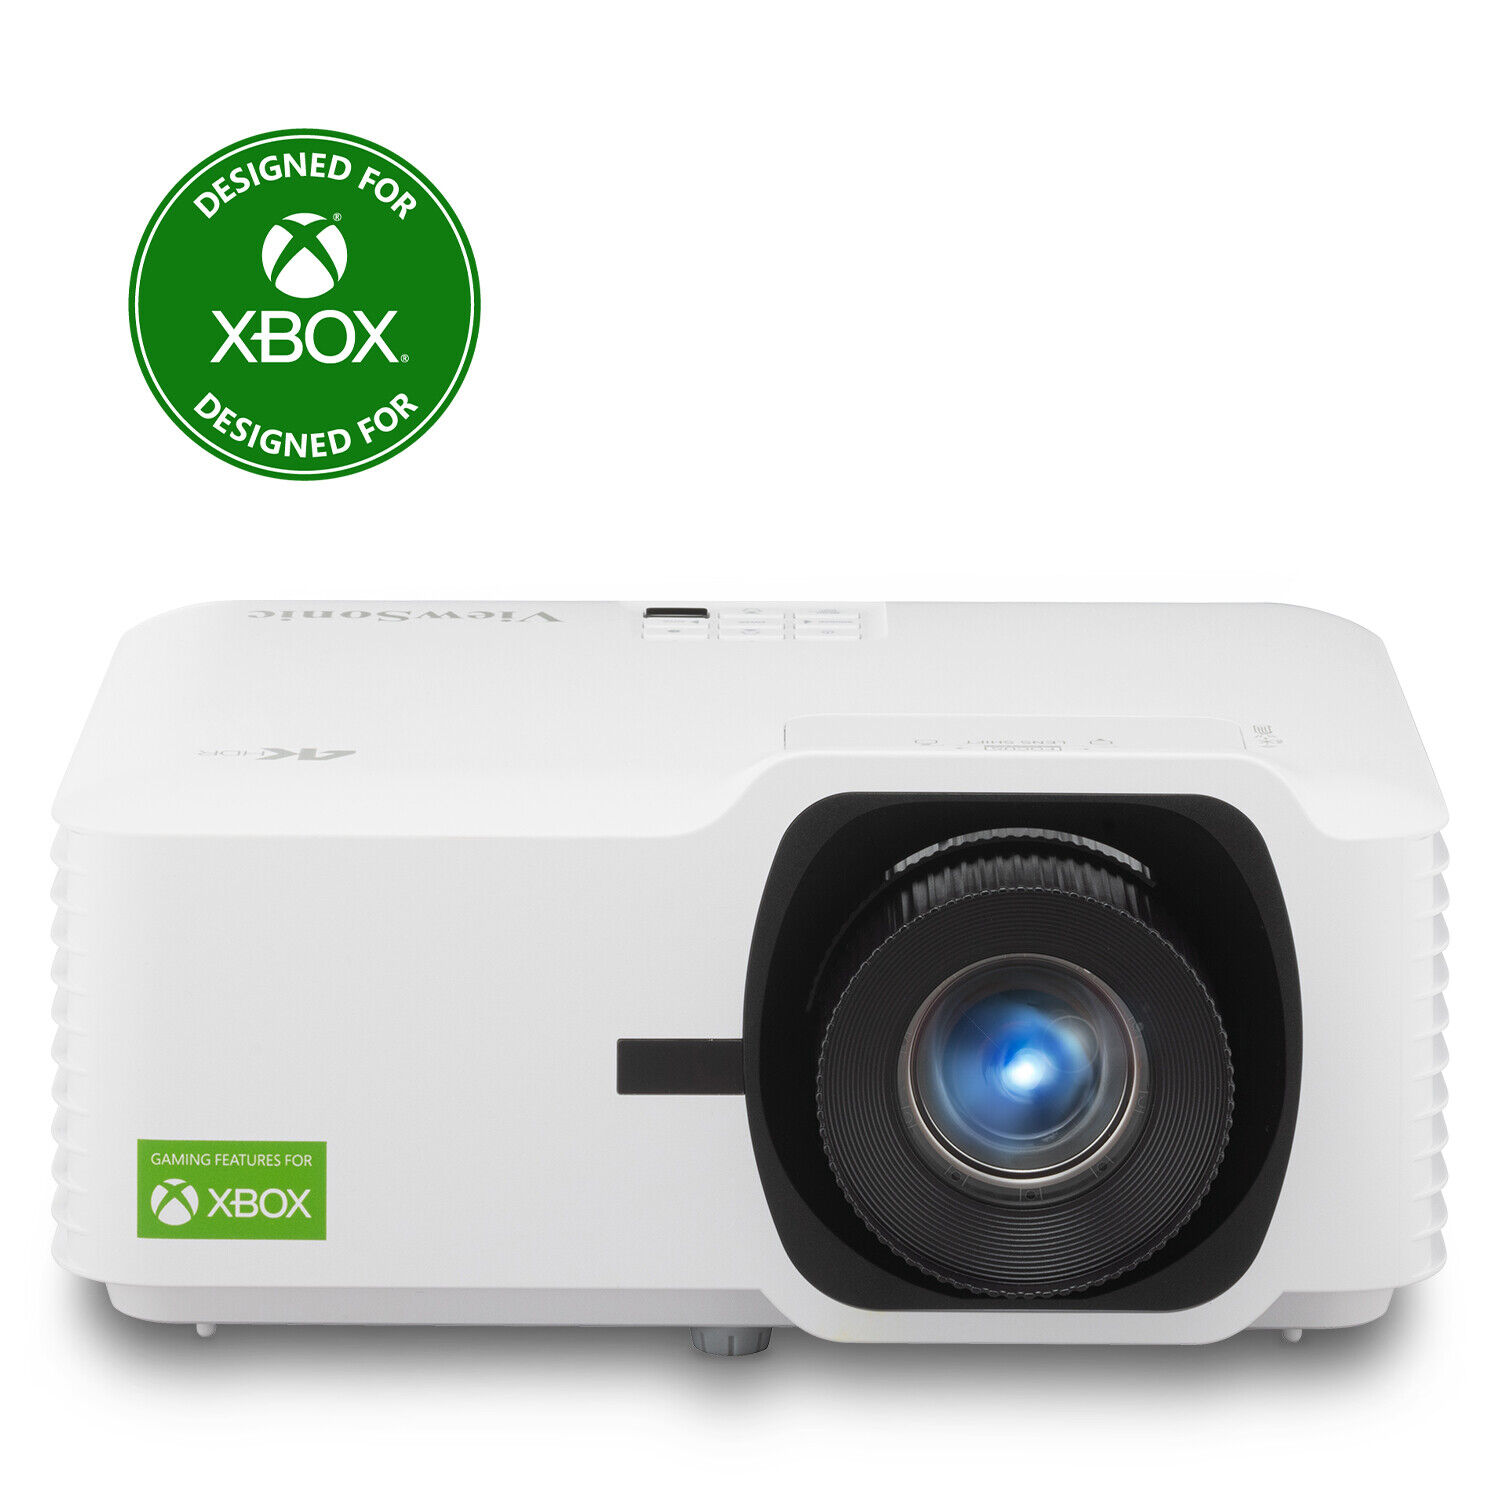 ViewSonic LX700-4K 3500 ANSI Lumens 4K UHD Laser Gaming Projector for Xbox